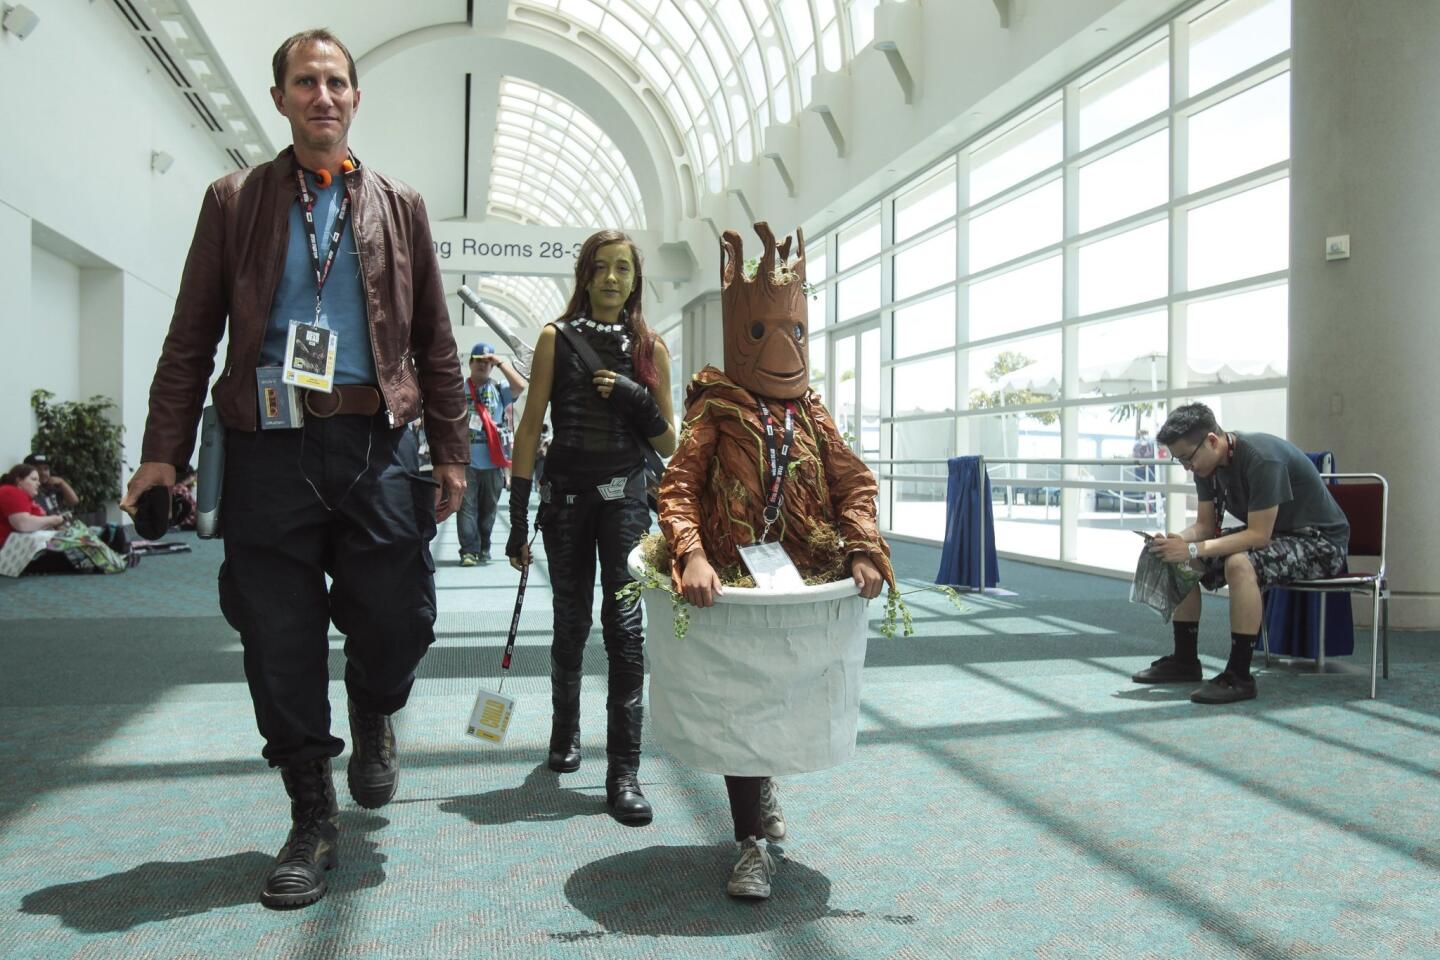 While all of the dressed as characters in the movie "Guardians of the Galaxy" Jeff Hernandez and daughters Lianna, 9, right, in a Baby Groot costume, and Gabriella, 12, dressed as Gamora, walk through the San Diego Convention Center during Comic-Con.